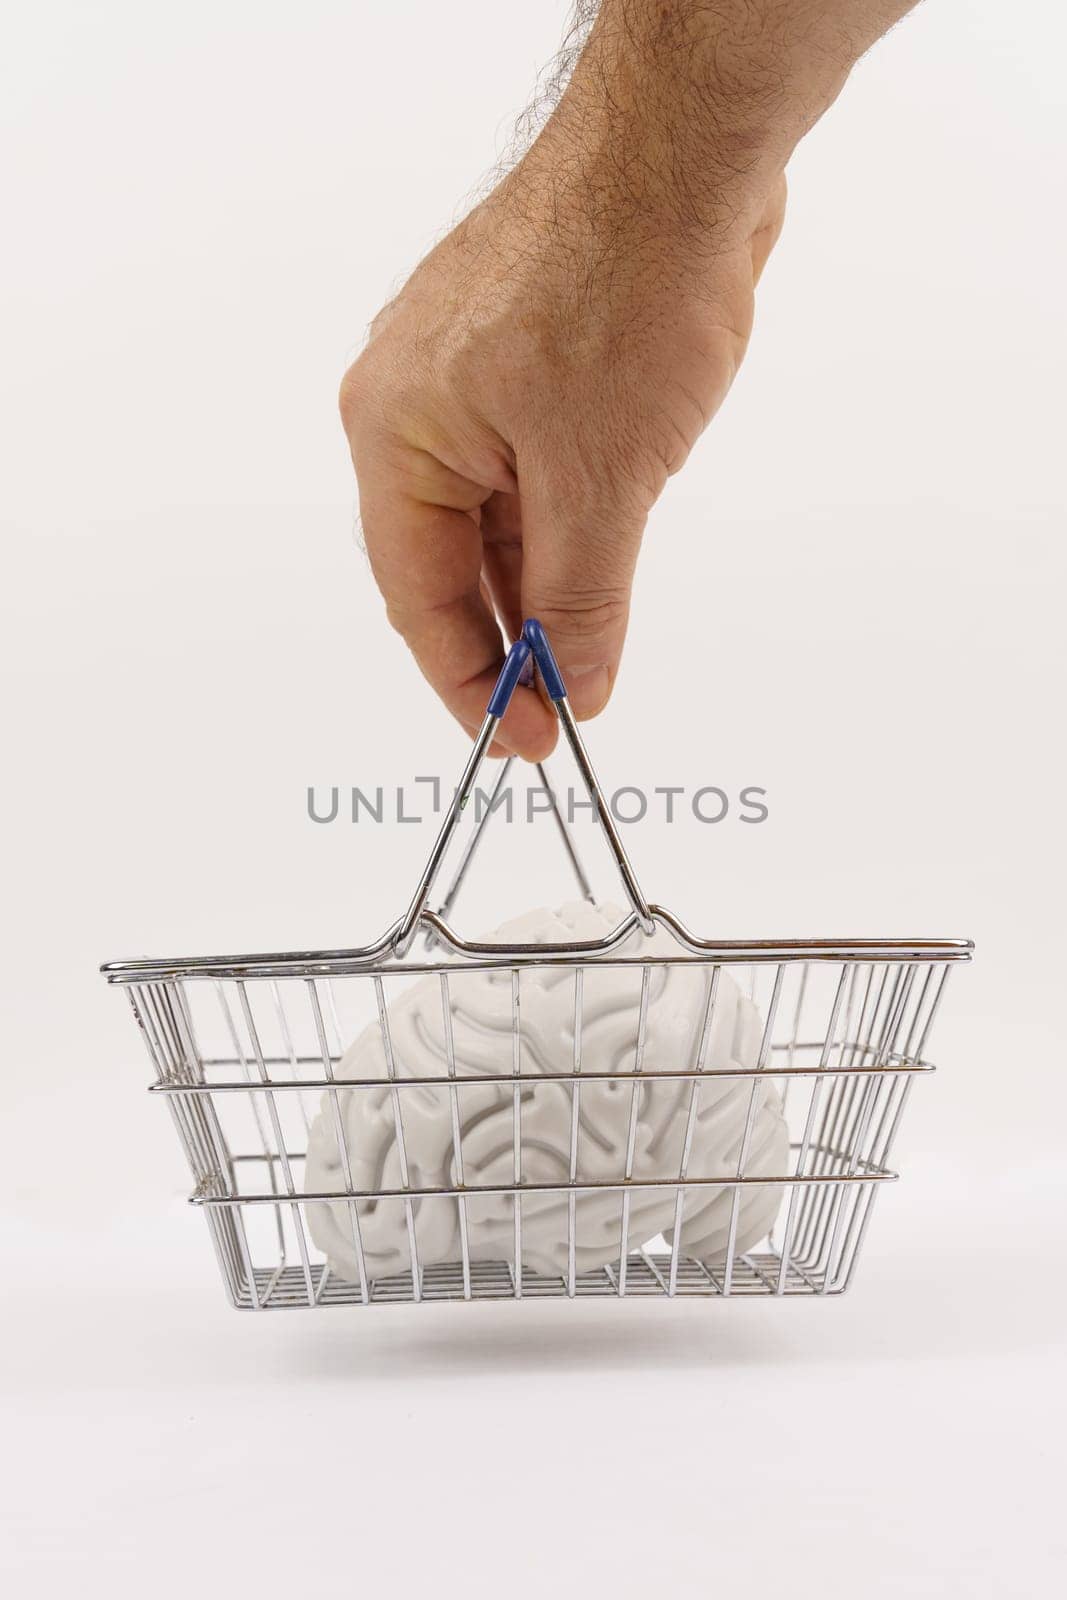 A man's hand holds a shopping basket with a human brain inside. Image on a white background. Vertical frame